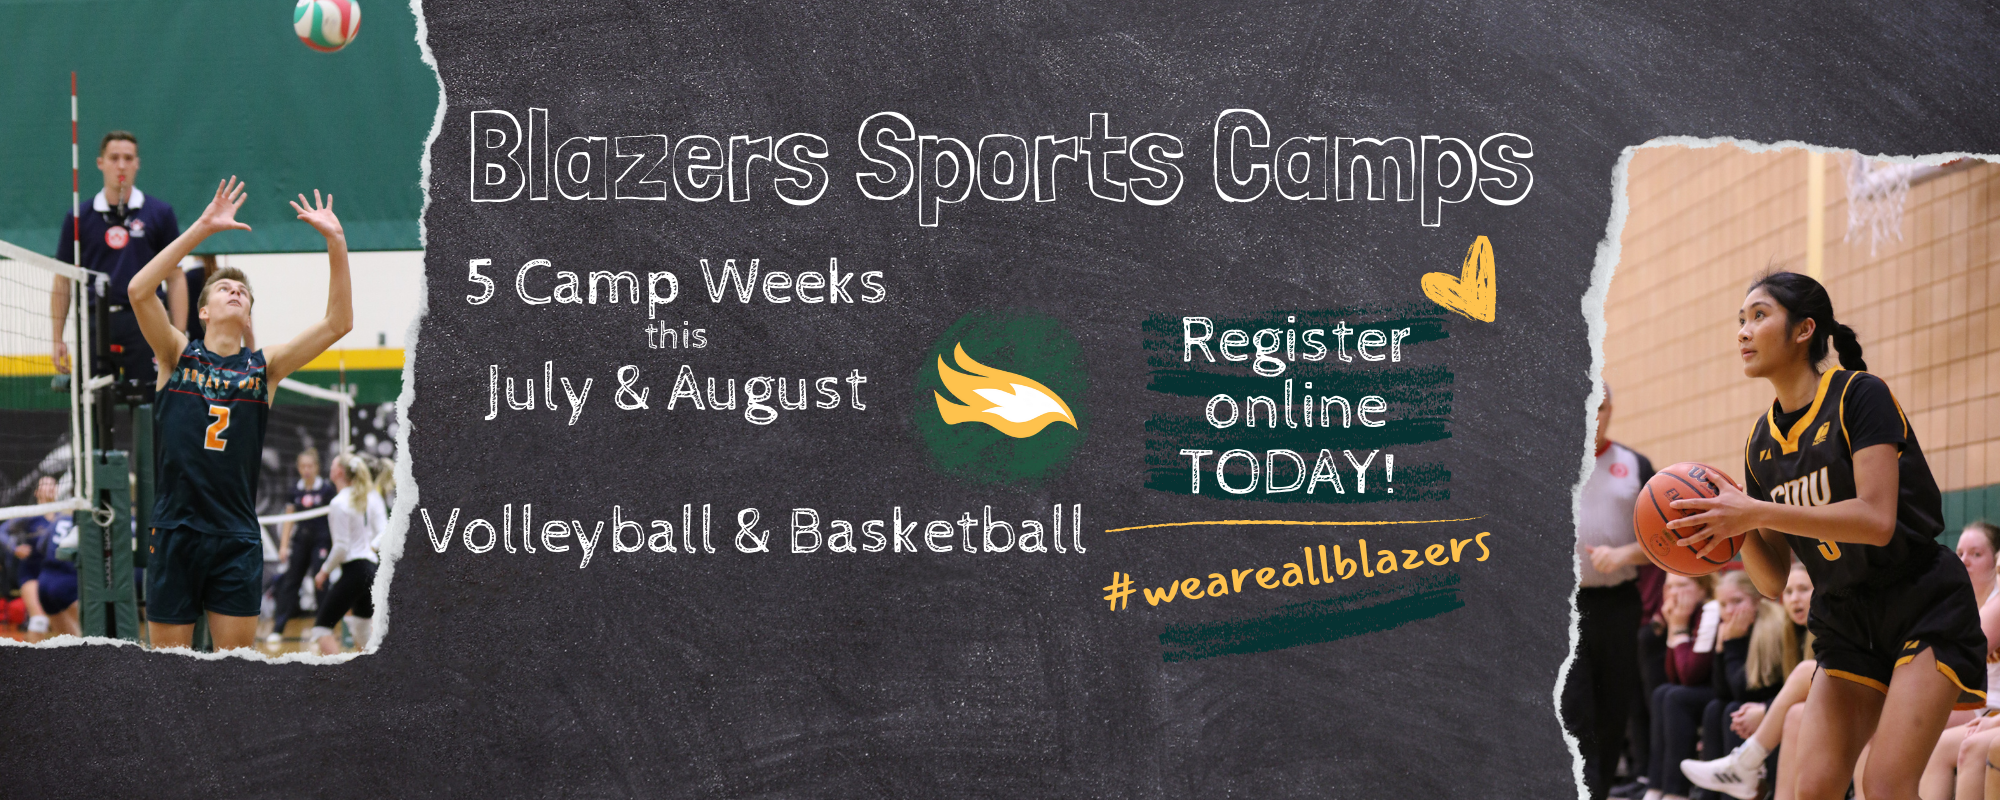 Blazers Sports Camps Registration Now Open!